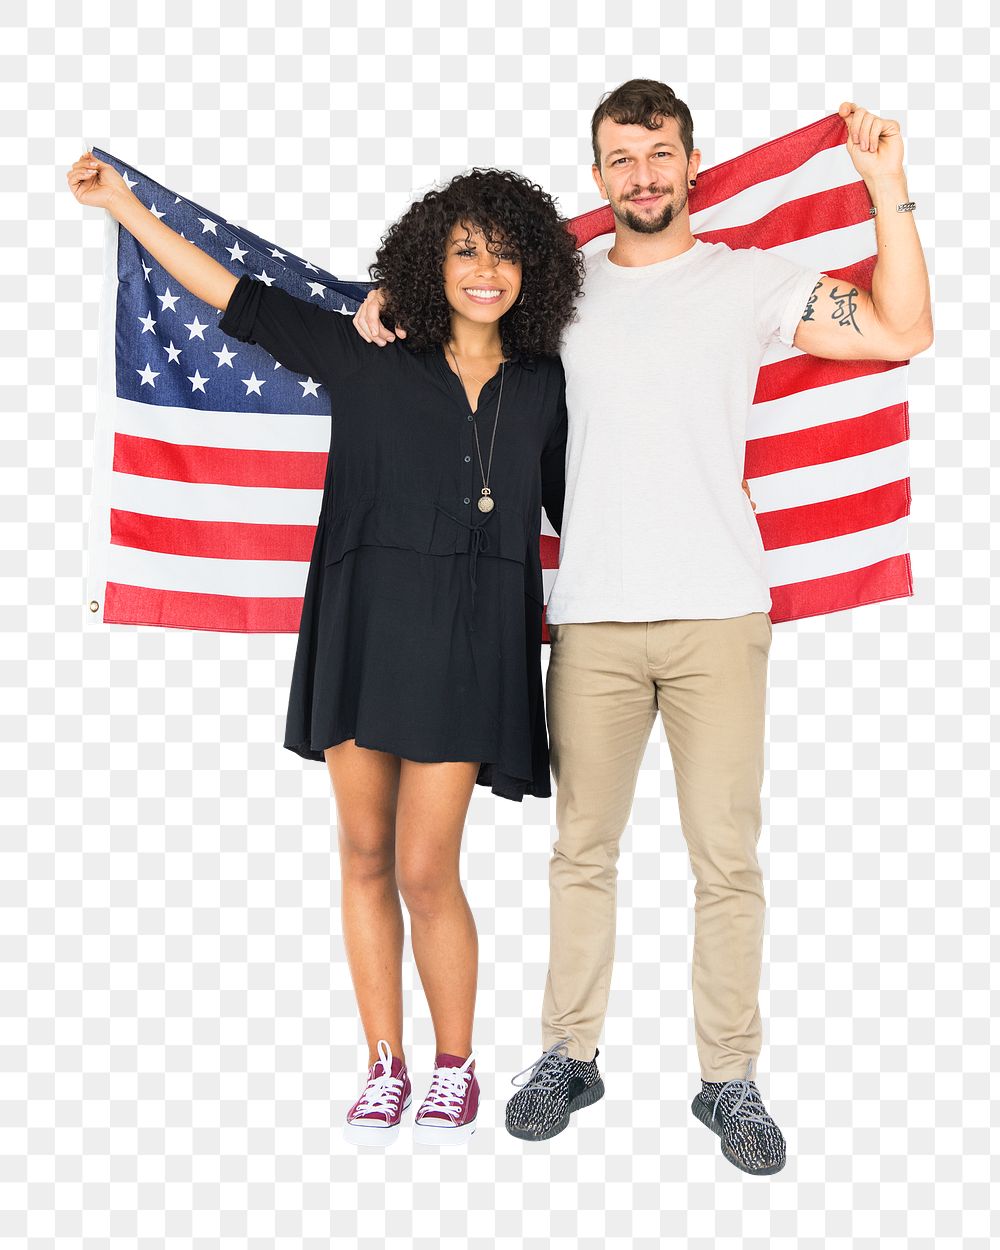 Png people holding the USA flag, collage element, transparent background